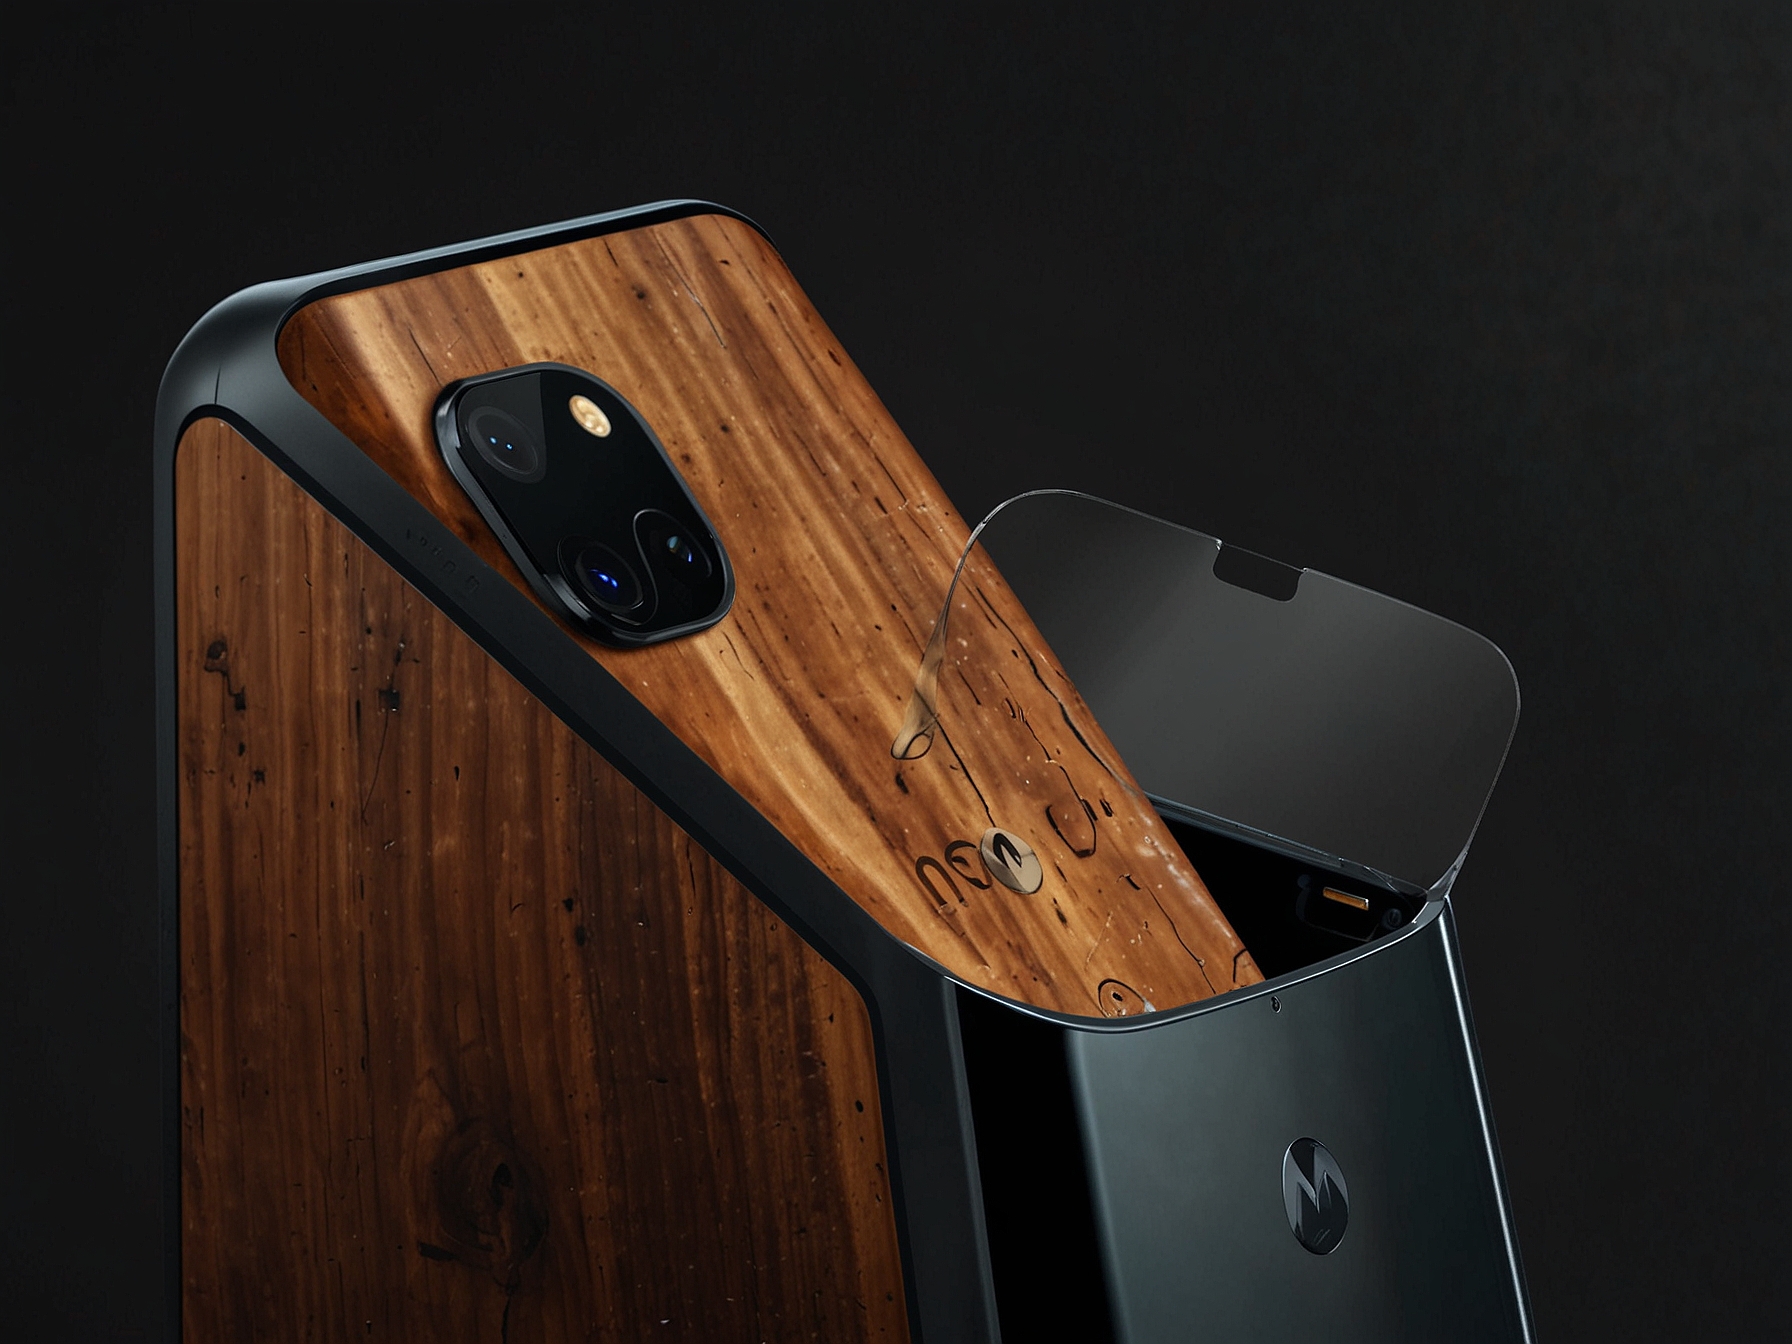 An image showcasing the elegant wooden back panel of the Motorola Edge 50 Ultra, highlighting its premium design and unique aesthetic compared to conventional glass and metal finishes.